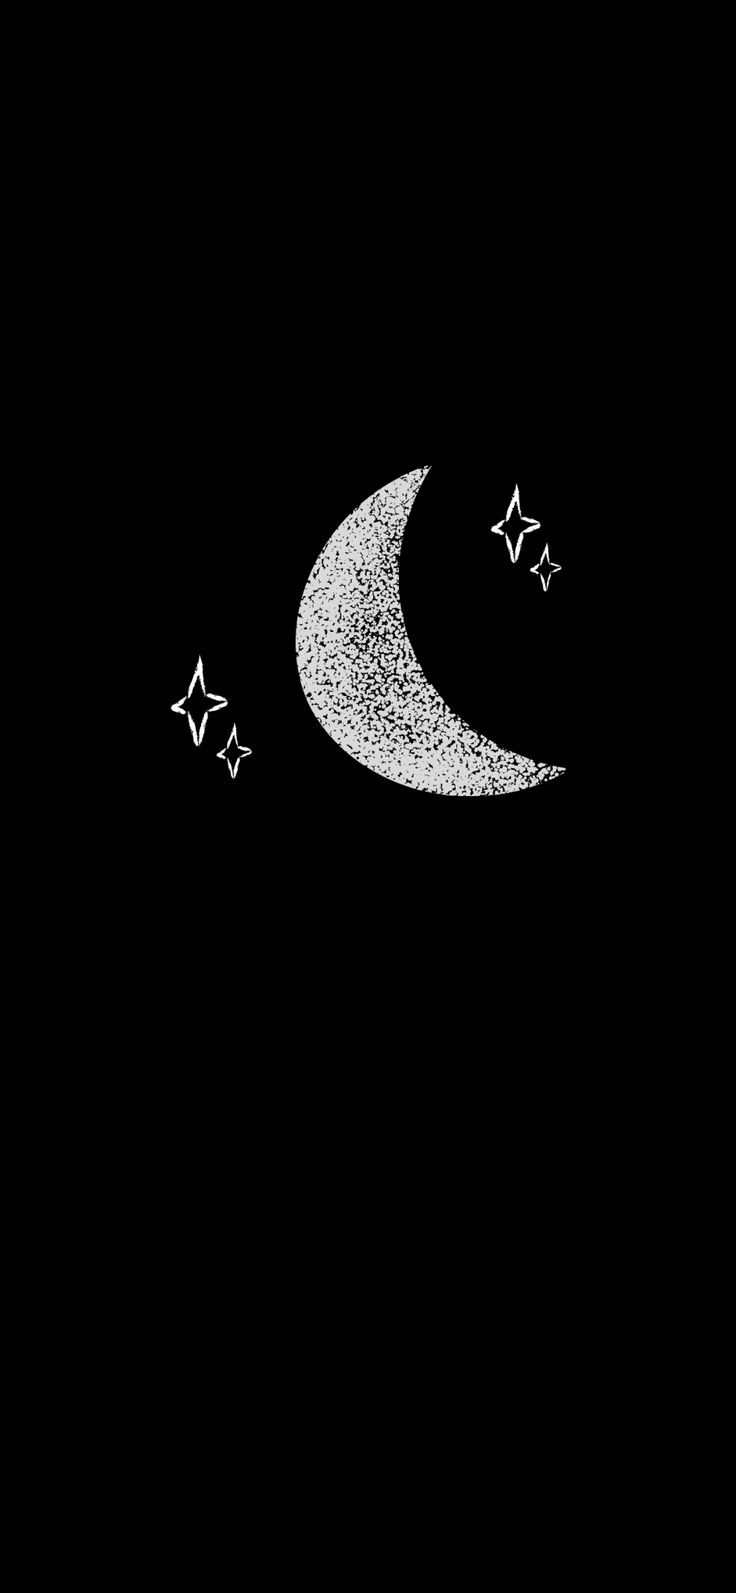 Moon Amoled Wallpapers - Top Free Moon Amoled Backgrounds - WallpaperAccess